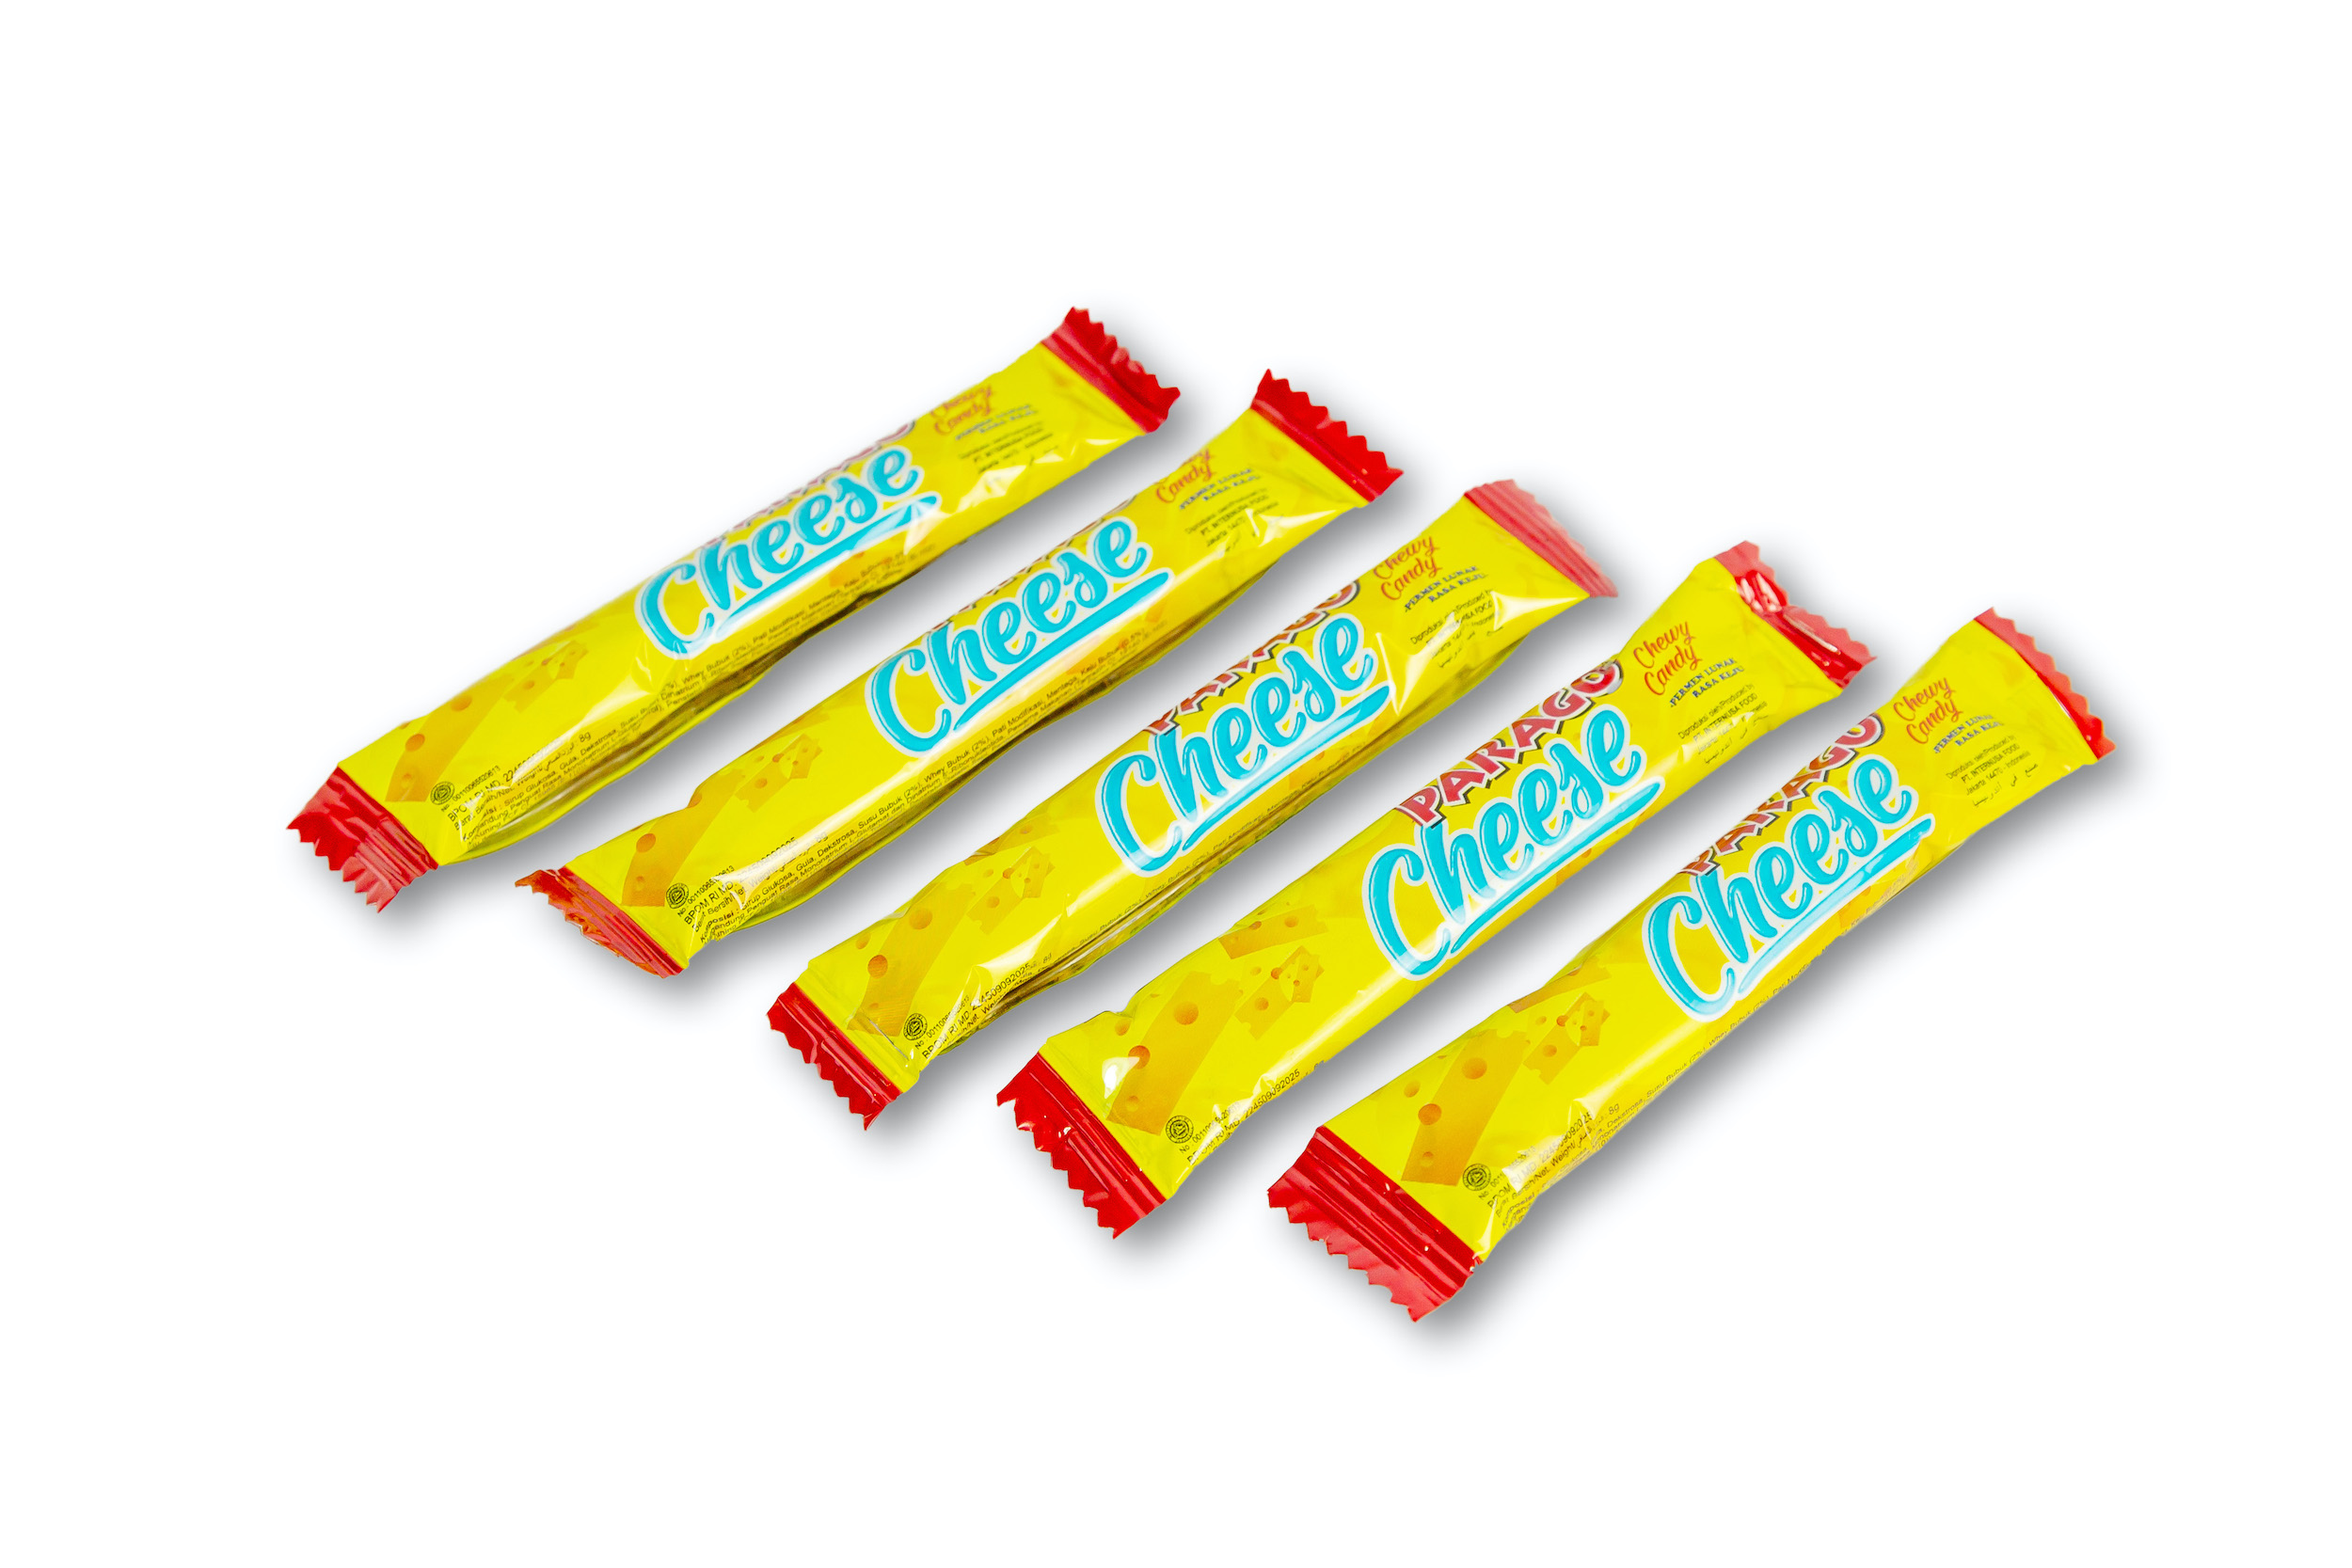 Made from flavourful cheese powder, Parago Chewy Cheese candy is a great treat at parties, events, or a tasty snack to share at home with family and friends. Surprise you kids and loved ones with its rich savoury flavour and long-lasting chewy texture, like nothing they have ever tasted before! It is bite-sized and conveniently packaged, which also makes it a perfect snack for on the go.   Ingredients Glucose Syrup, Sugar, Dextrose, Milk Powder (2%), Whey Powder (2%), Modified Starch, Butter, Cheese Powder (0,5%) (contains flavour enhancers Monosodium L-Glutamate and Disodium 5'-Ribonucleotides, Food Colourant (Tartrazine CI. 19140 (E-102) and Sunset Yellow FCF CI. 15985 (E-110)), Antioxidant Tocopherols), Beef Gelatine stabilizer, Soya Lecithin emulsifier, Artificial Flavours (Cheese and Vanilla), Contains Sulphite preservative  Package content - 20boxes @80pcs @8g - 8boxes @80pcs @8g